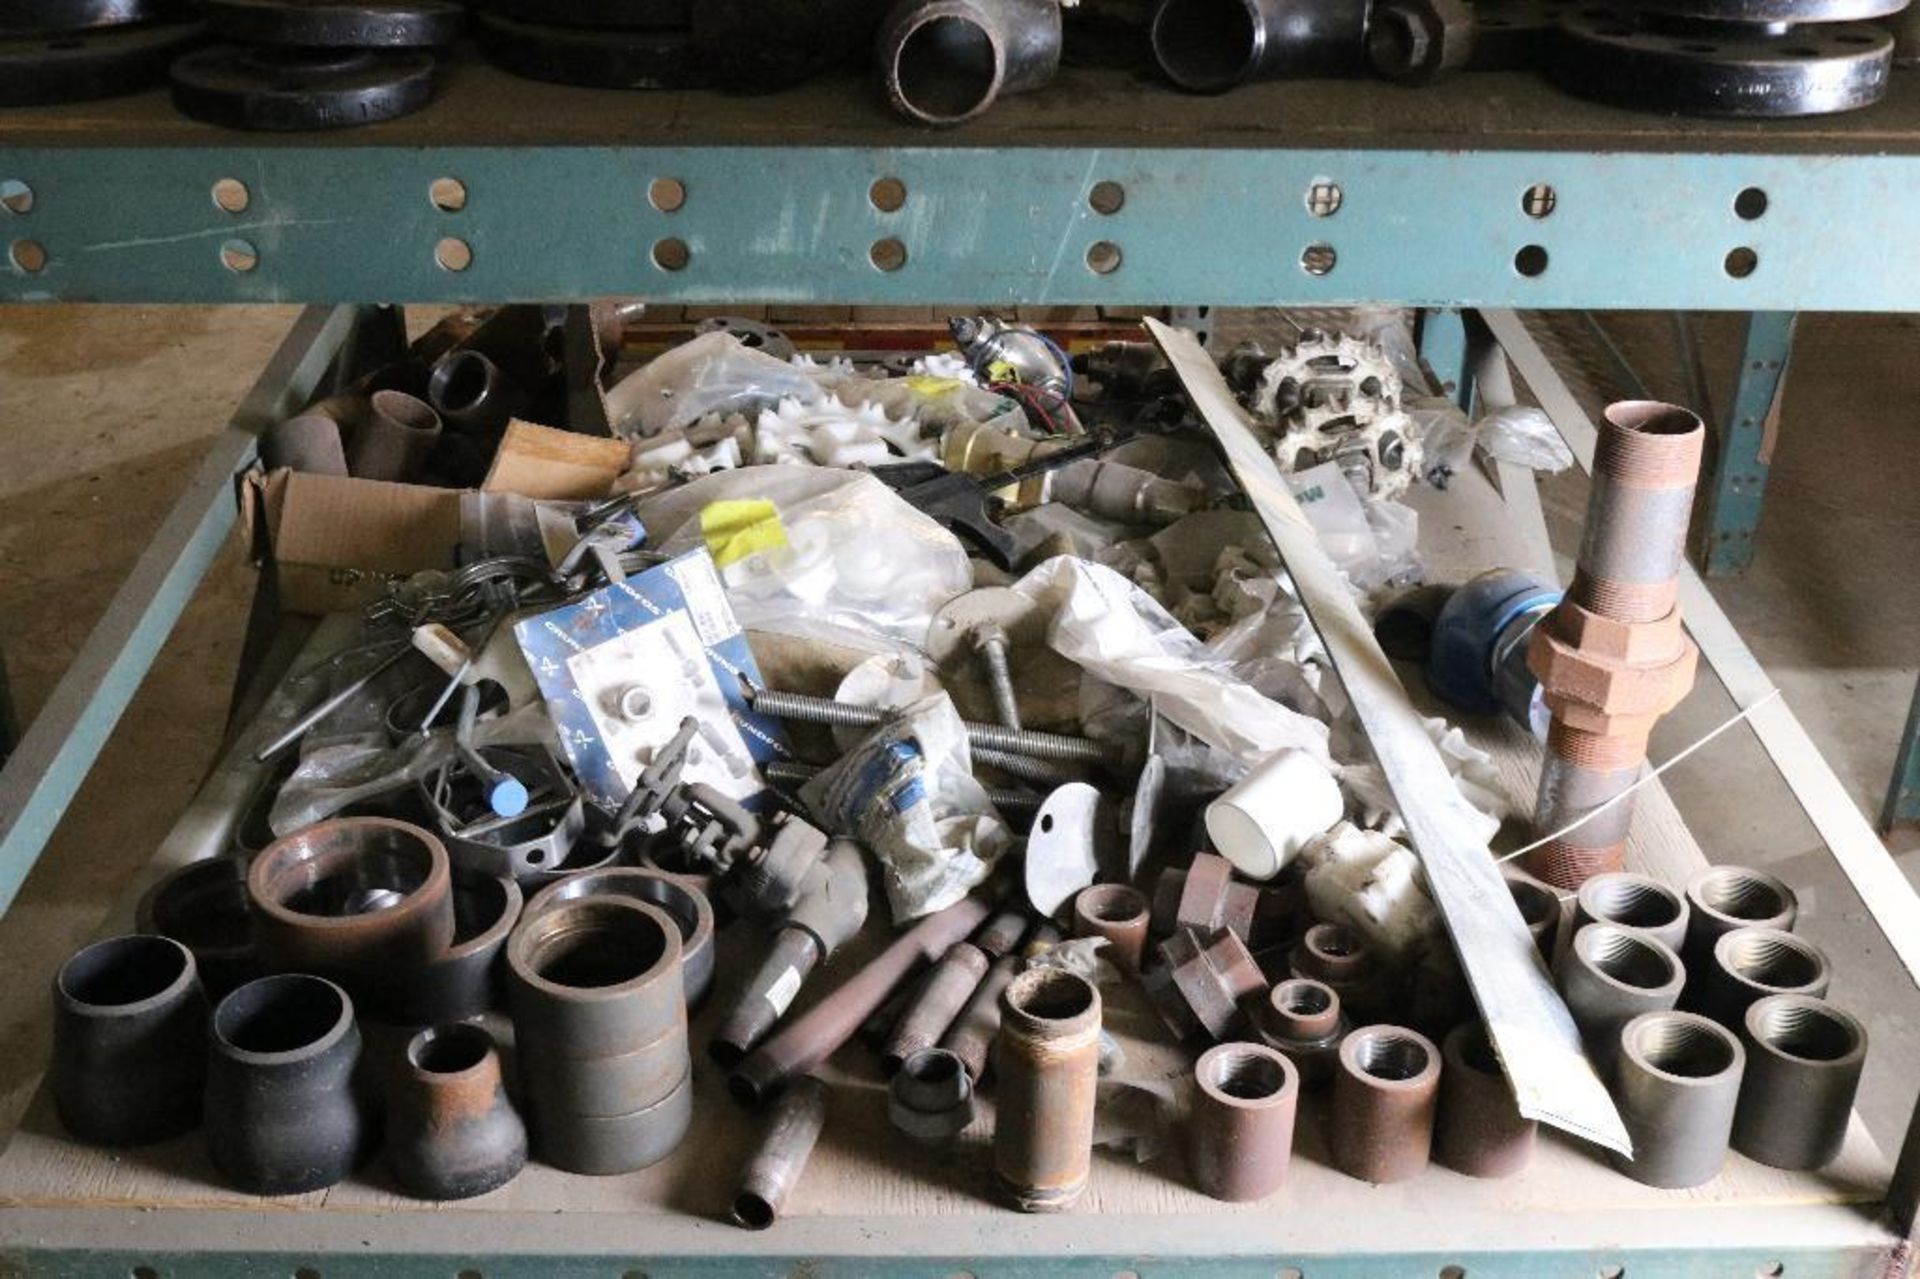 Contents of Shelves - Includes Pipe Fittings, Flanges, and Other Misc. Pipe Components - Image 5 of 9